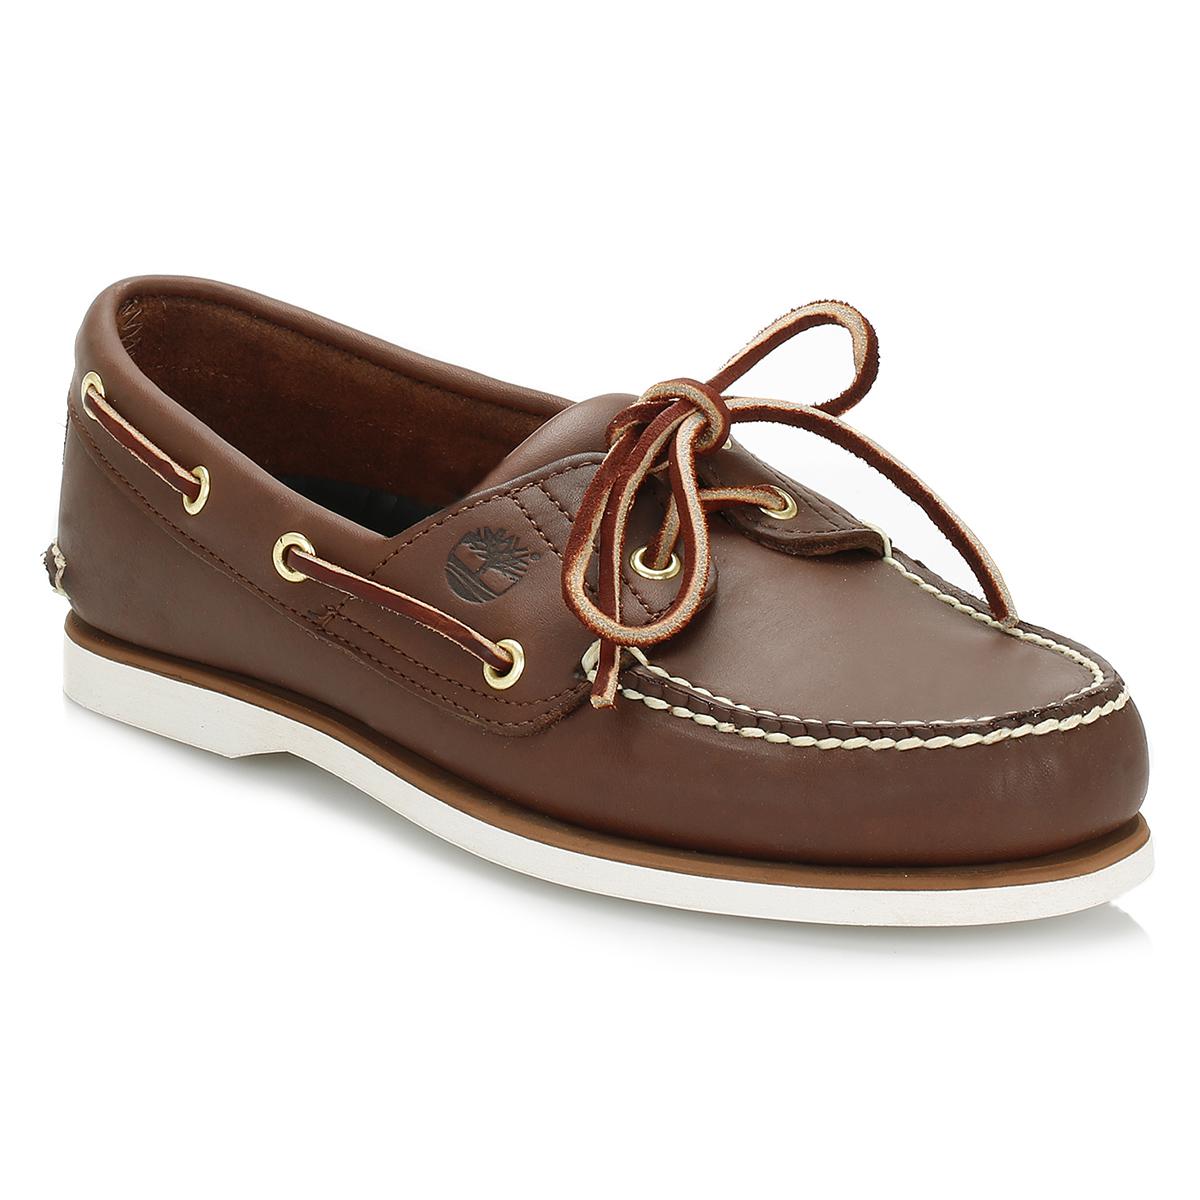 Lyst Timberland Classic Mens Brown Leather Boat Shoes in